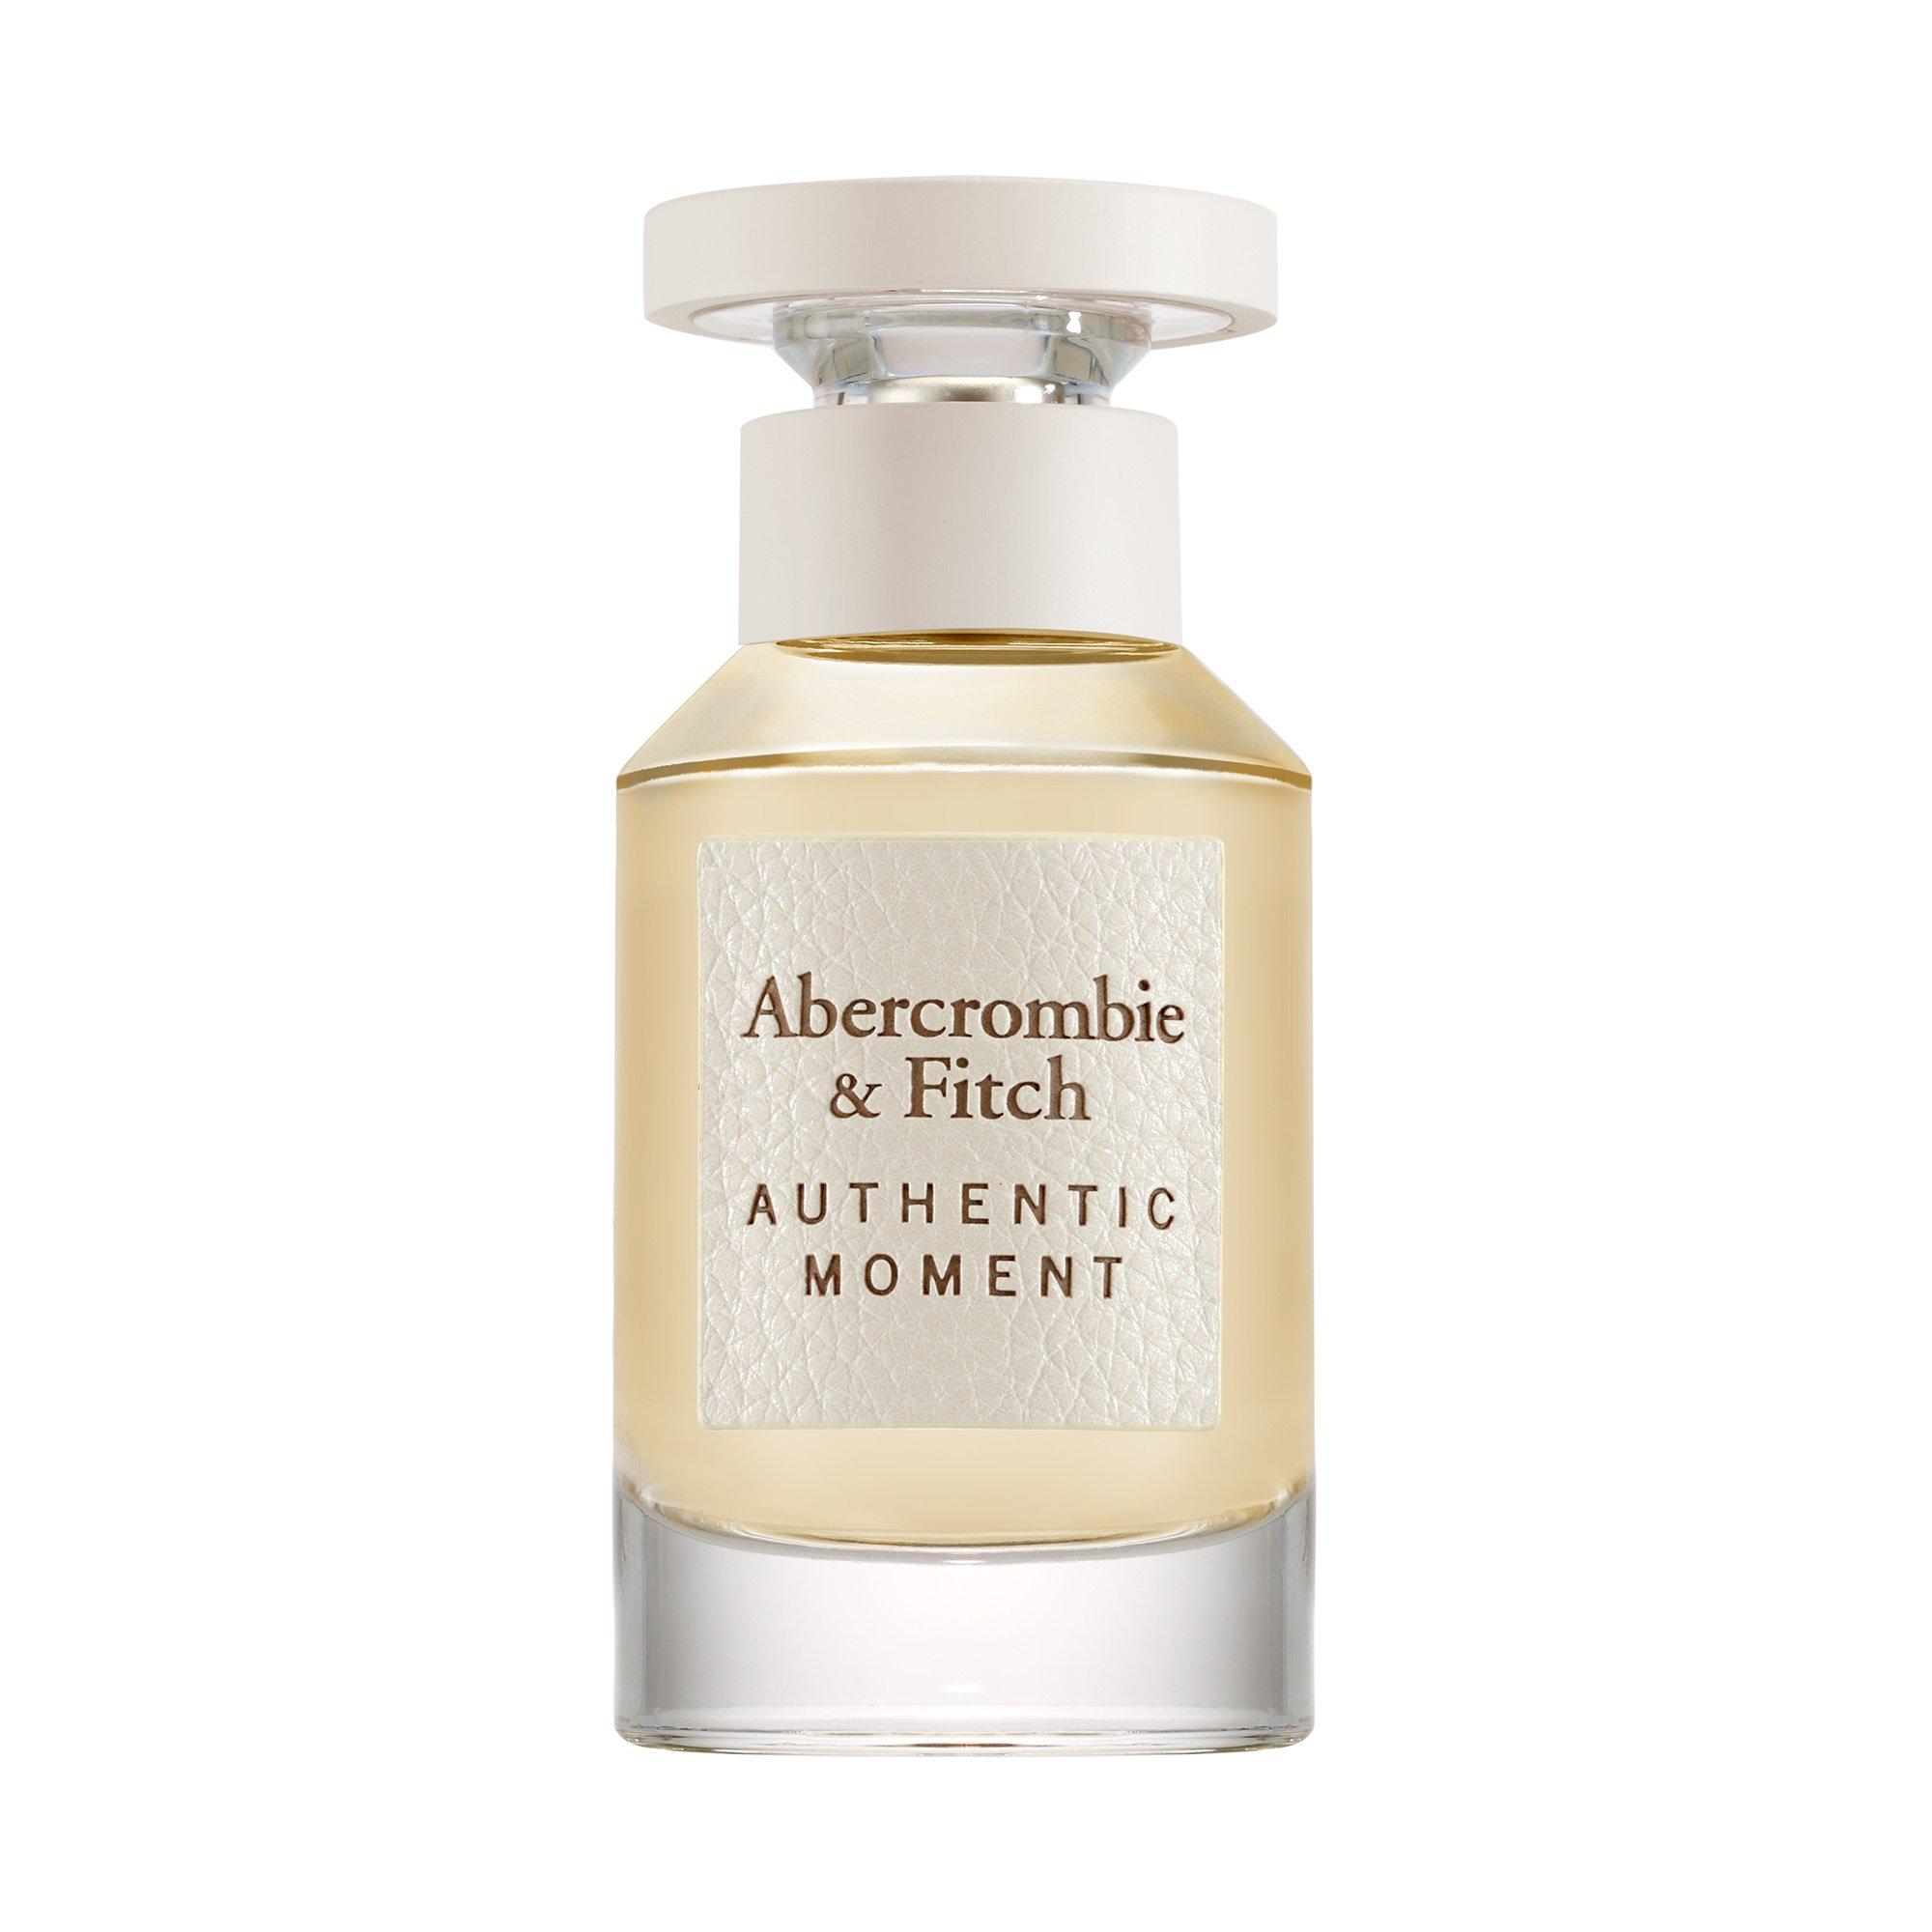 Image of Abercrombie & Fitch Authentic Moment - 50ml